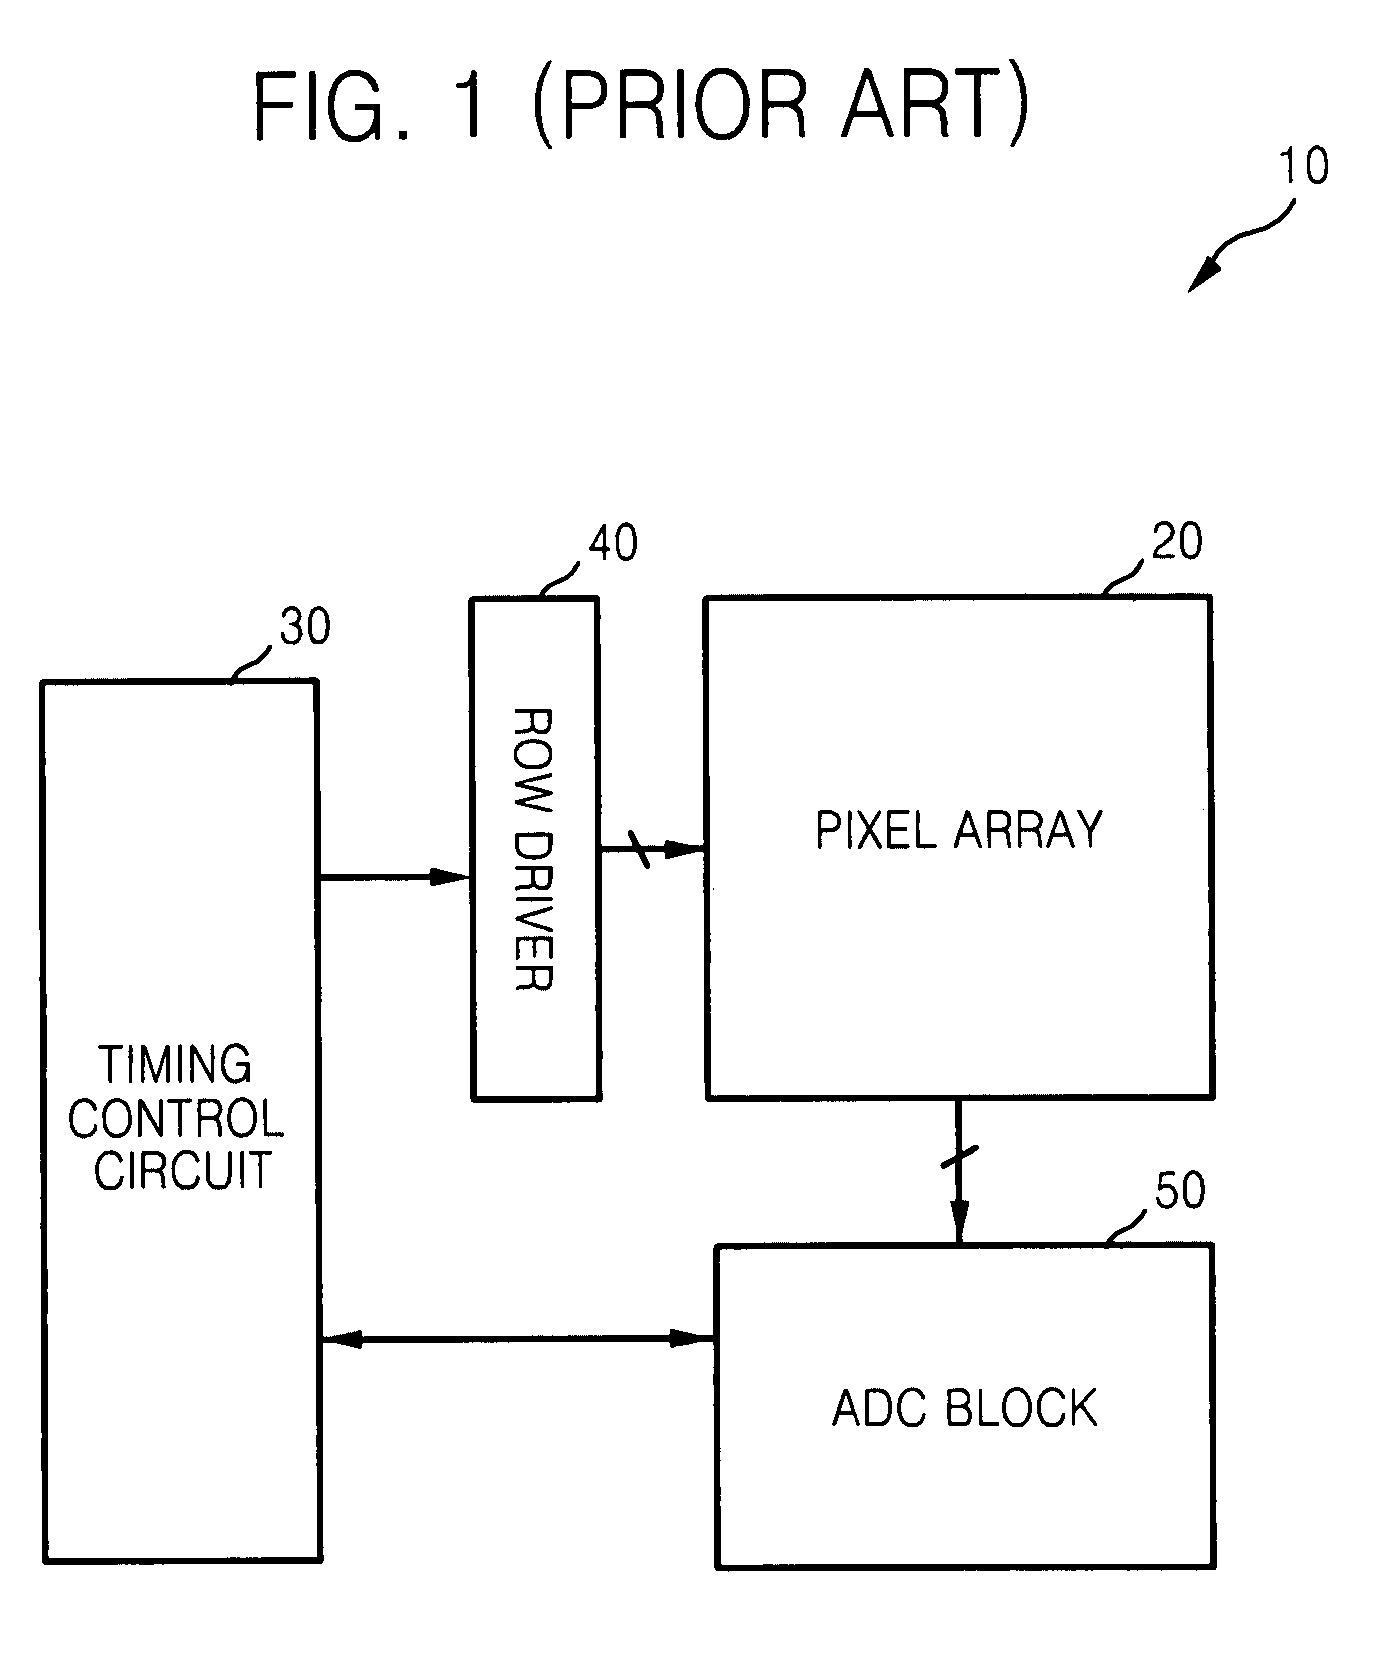 Apparatus and method for CDS and ADC with multiple samplings in image sensor